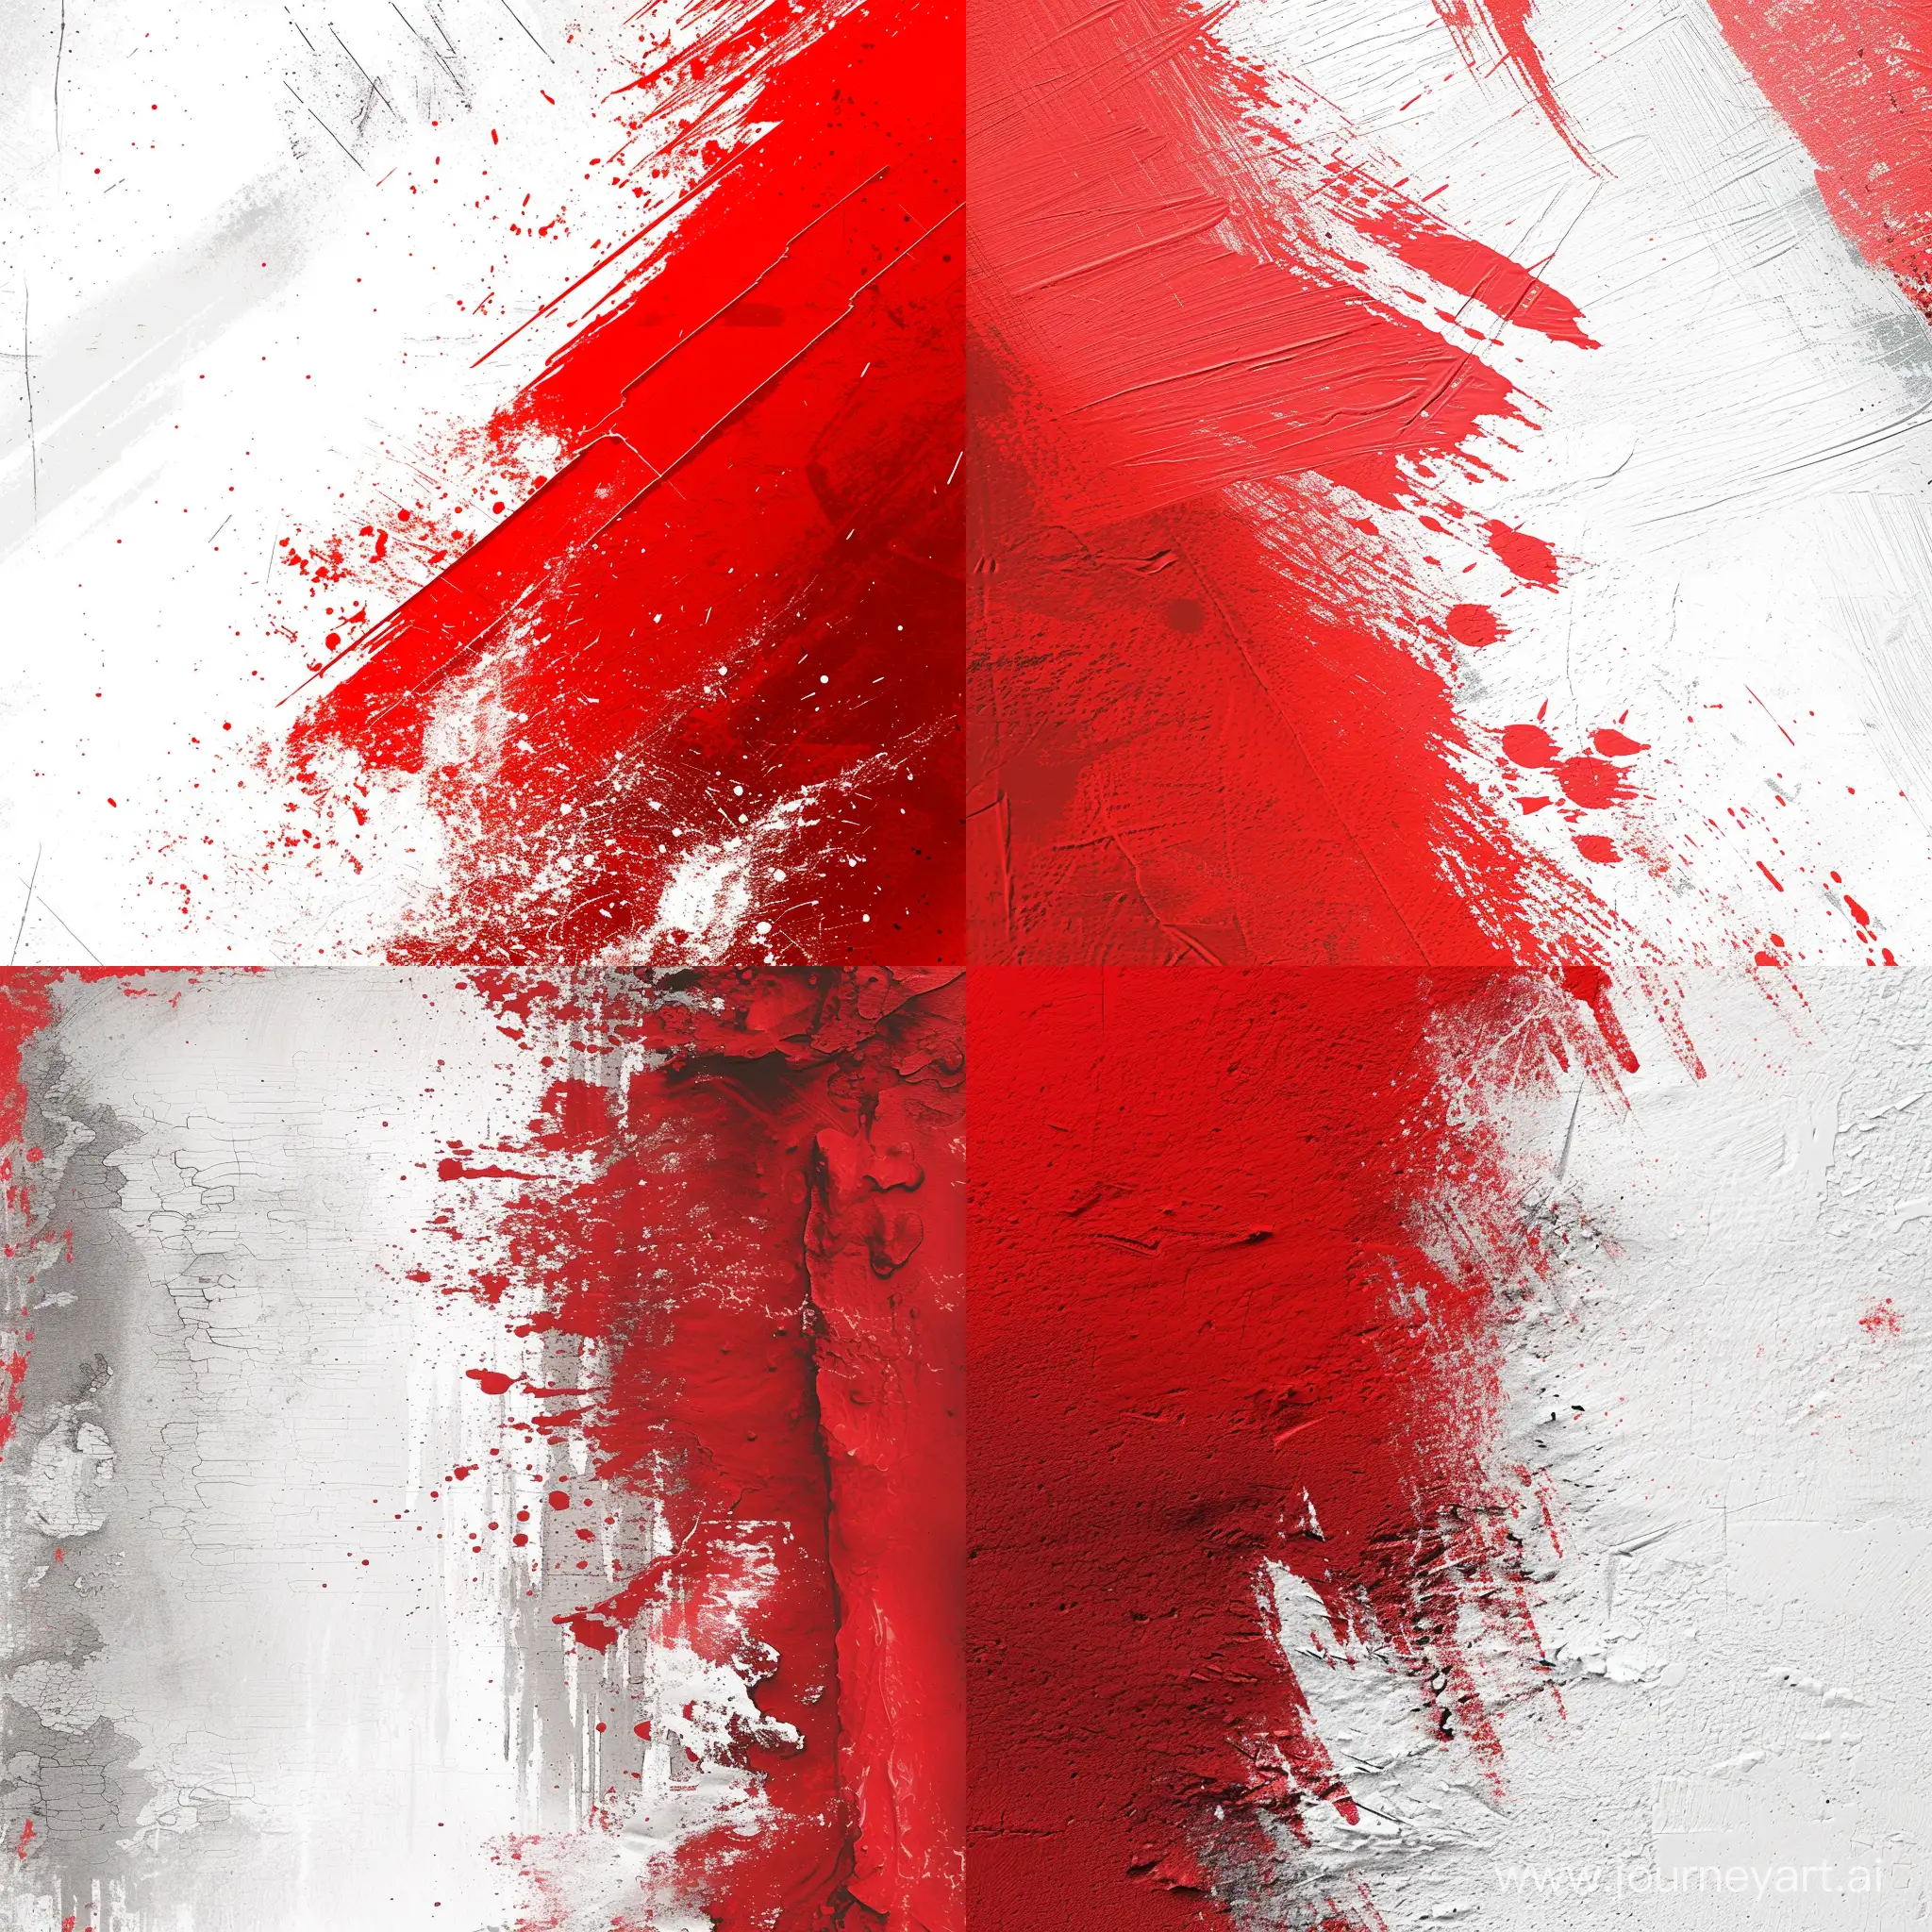 Make a background for a flyer that will use textured red and white colors, with spray paint effects